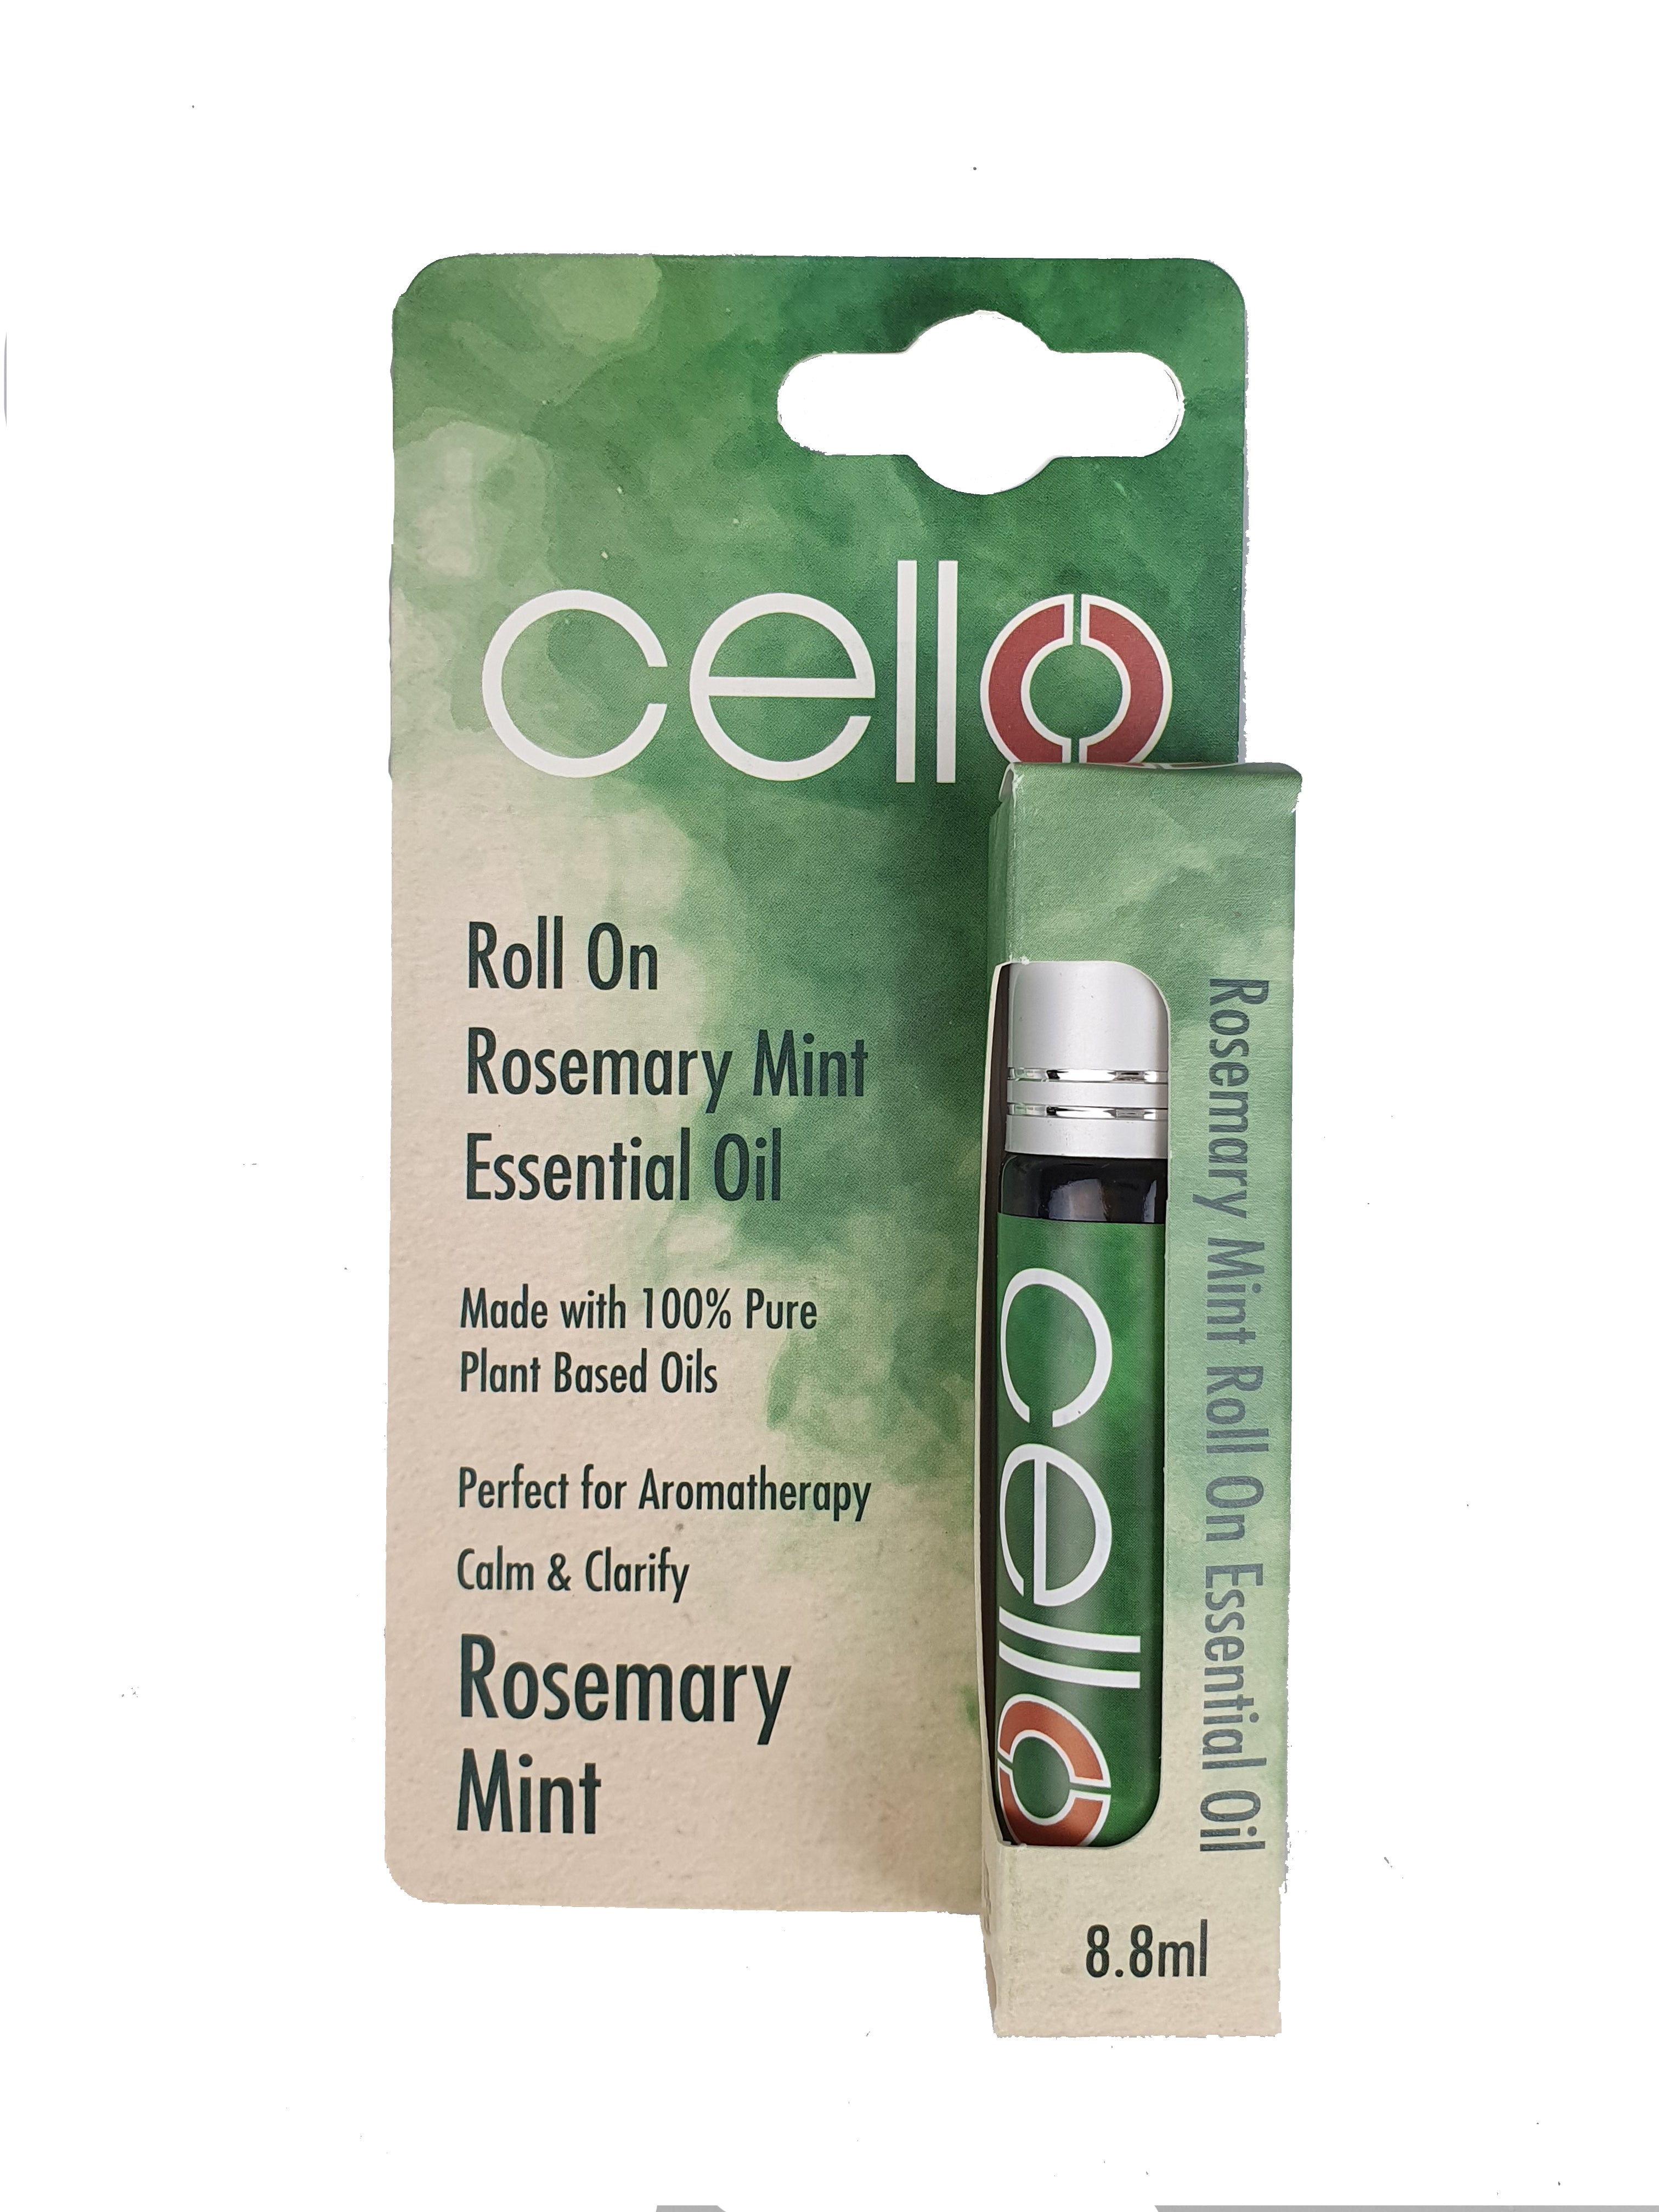 Cello - Rosemary Mint Roll On Natural Essential Oil 8.8ml